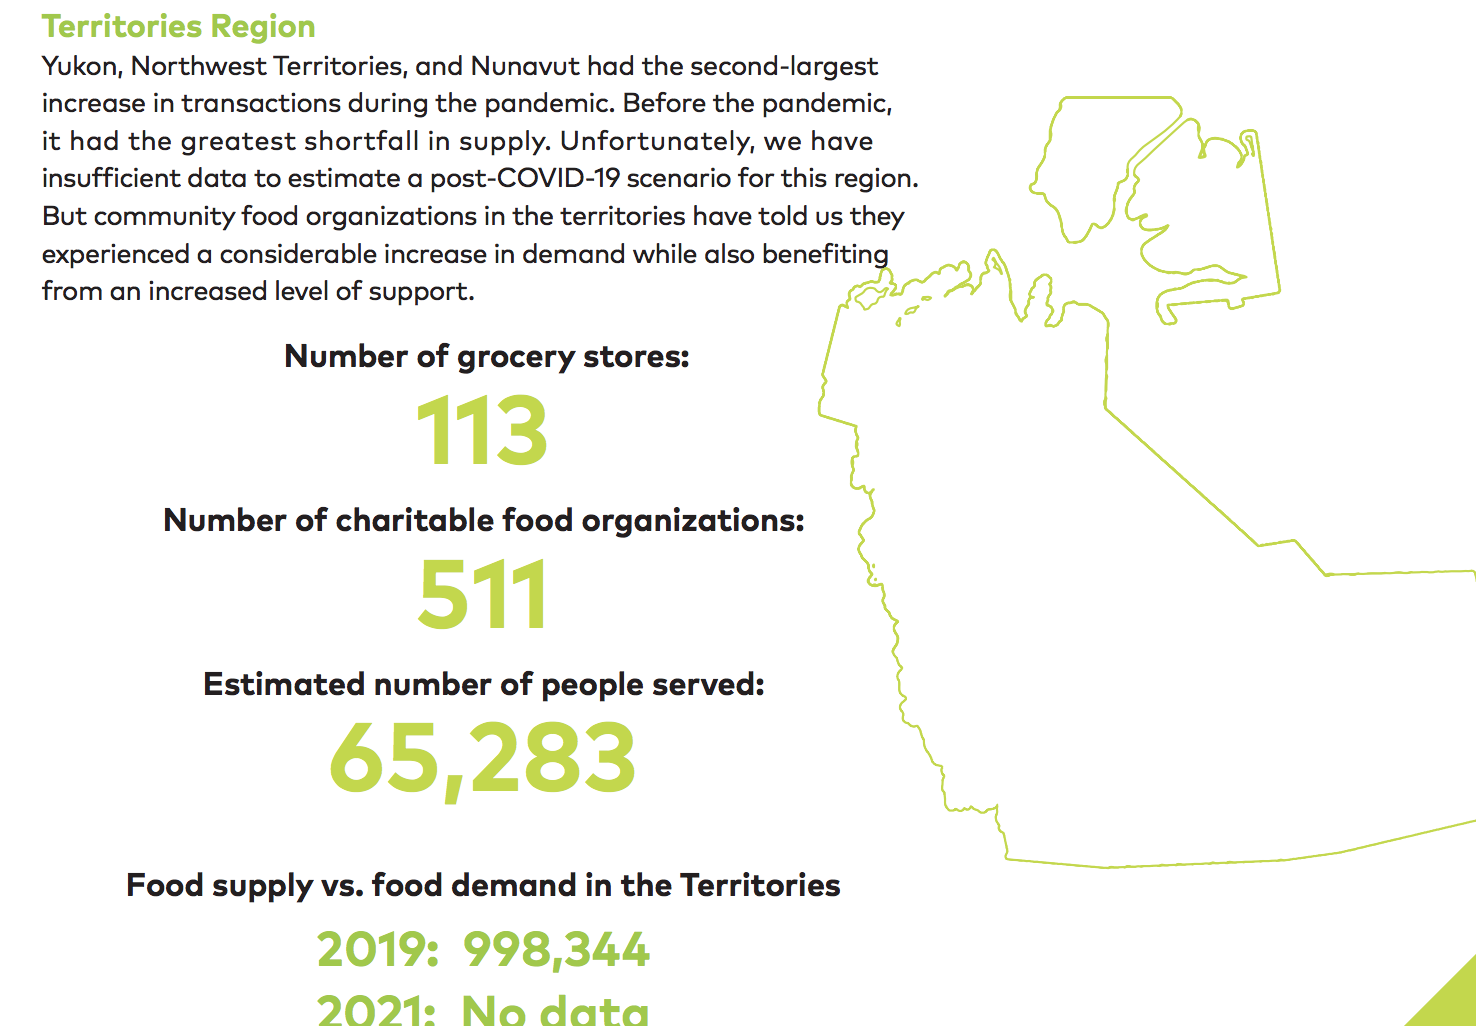 From Canada’s Invisible Food Network 2021 report by Second Harvest - Northwest Territories, Yukon, and Nunavut hunger relief efforts